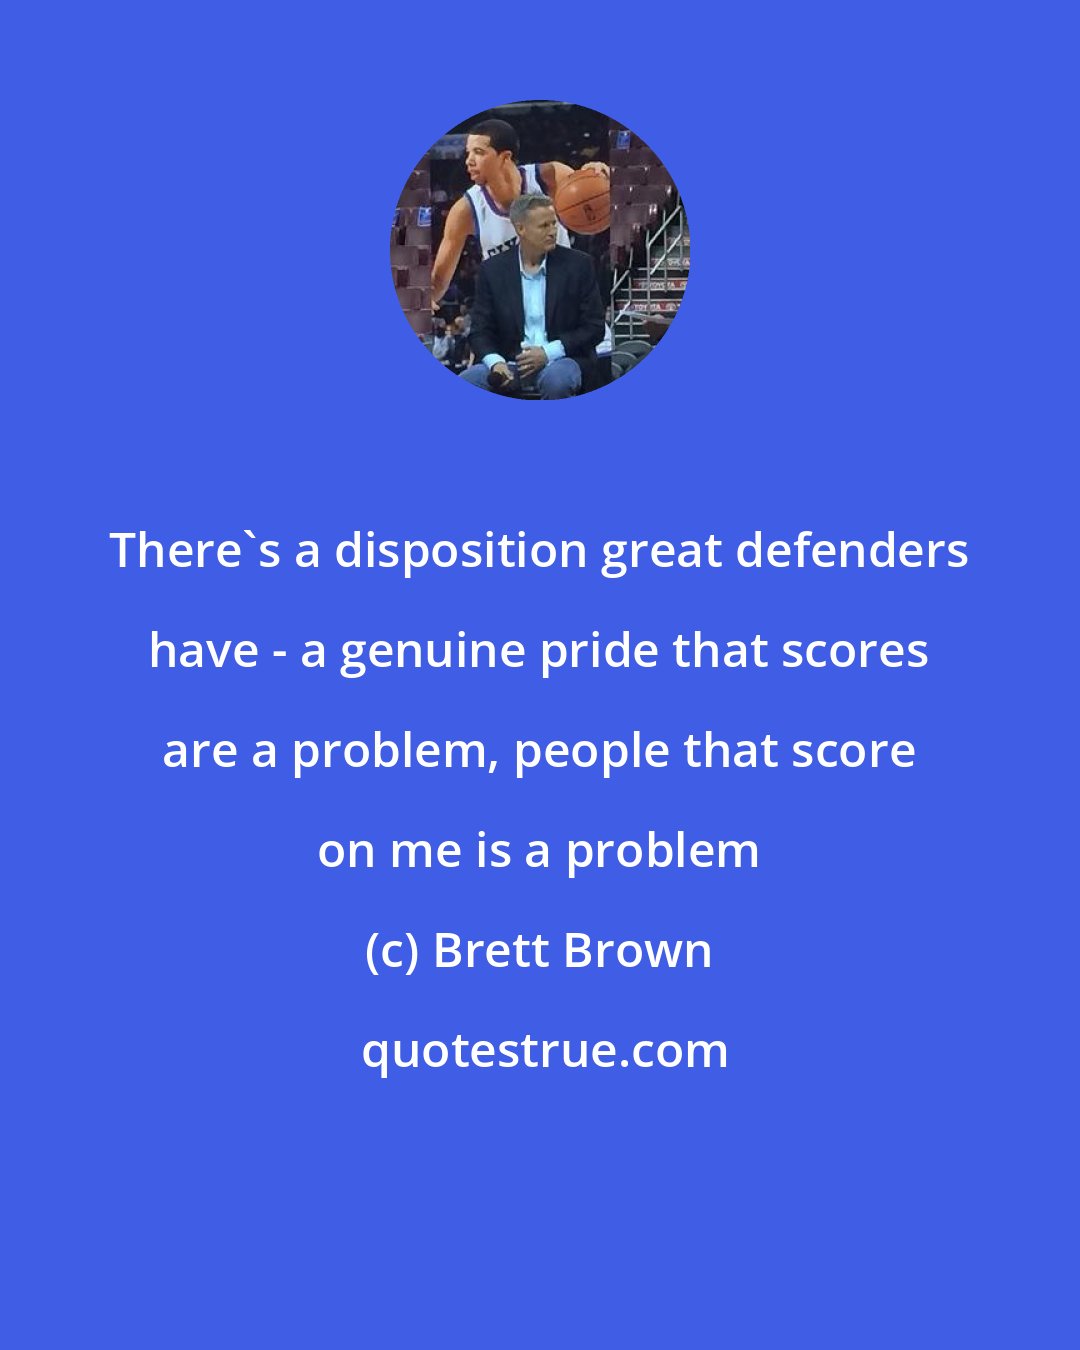 Brett Brown: There's a disposition great defenders have - a genuine pride that scores are a problem, people that score on me is a problem